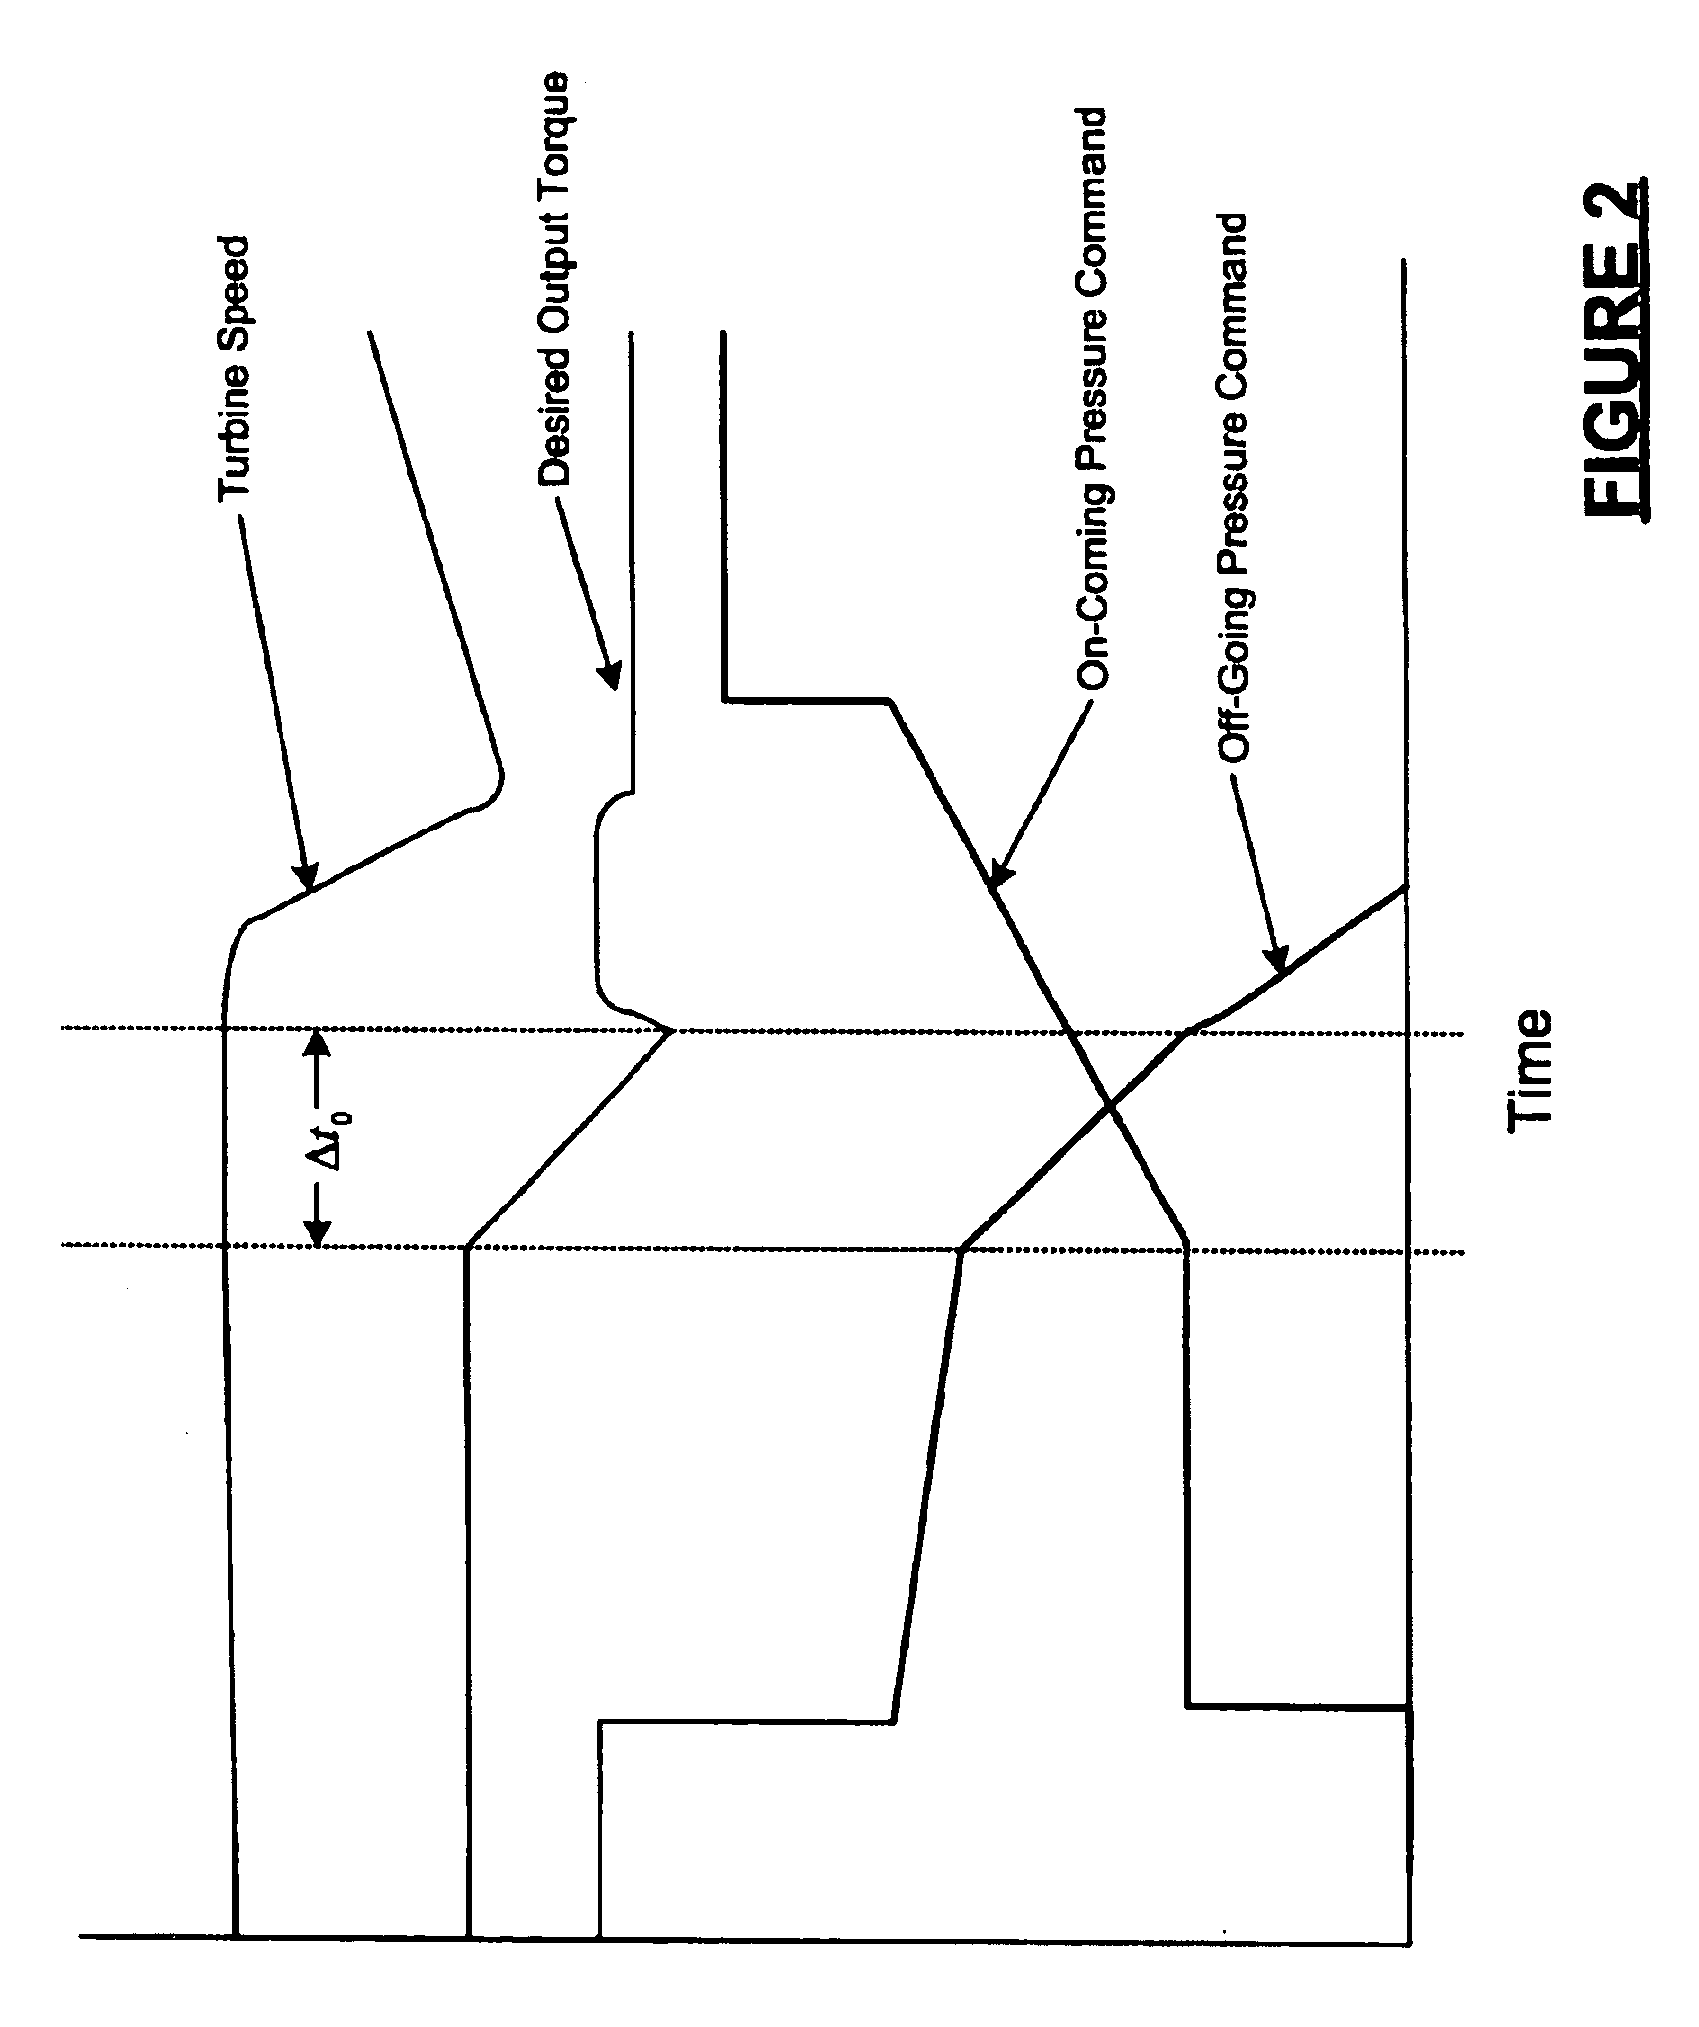 Electronic clutch-to-clutch transmission control system